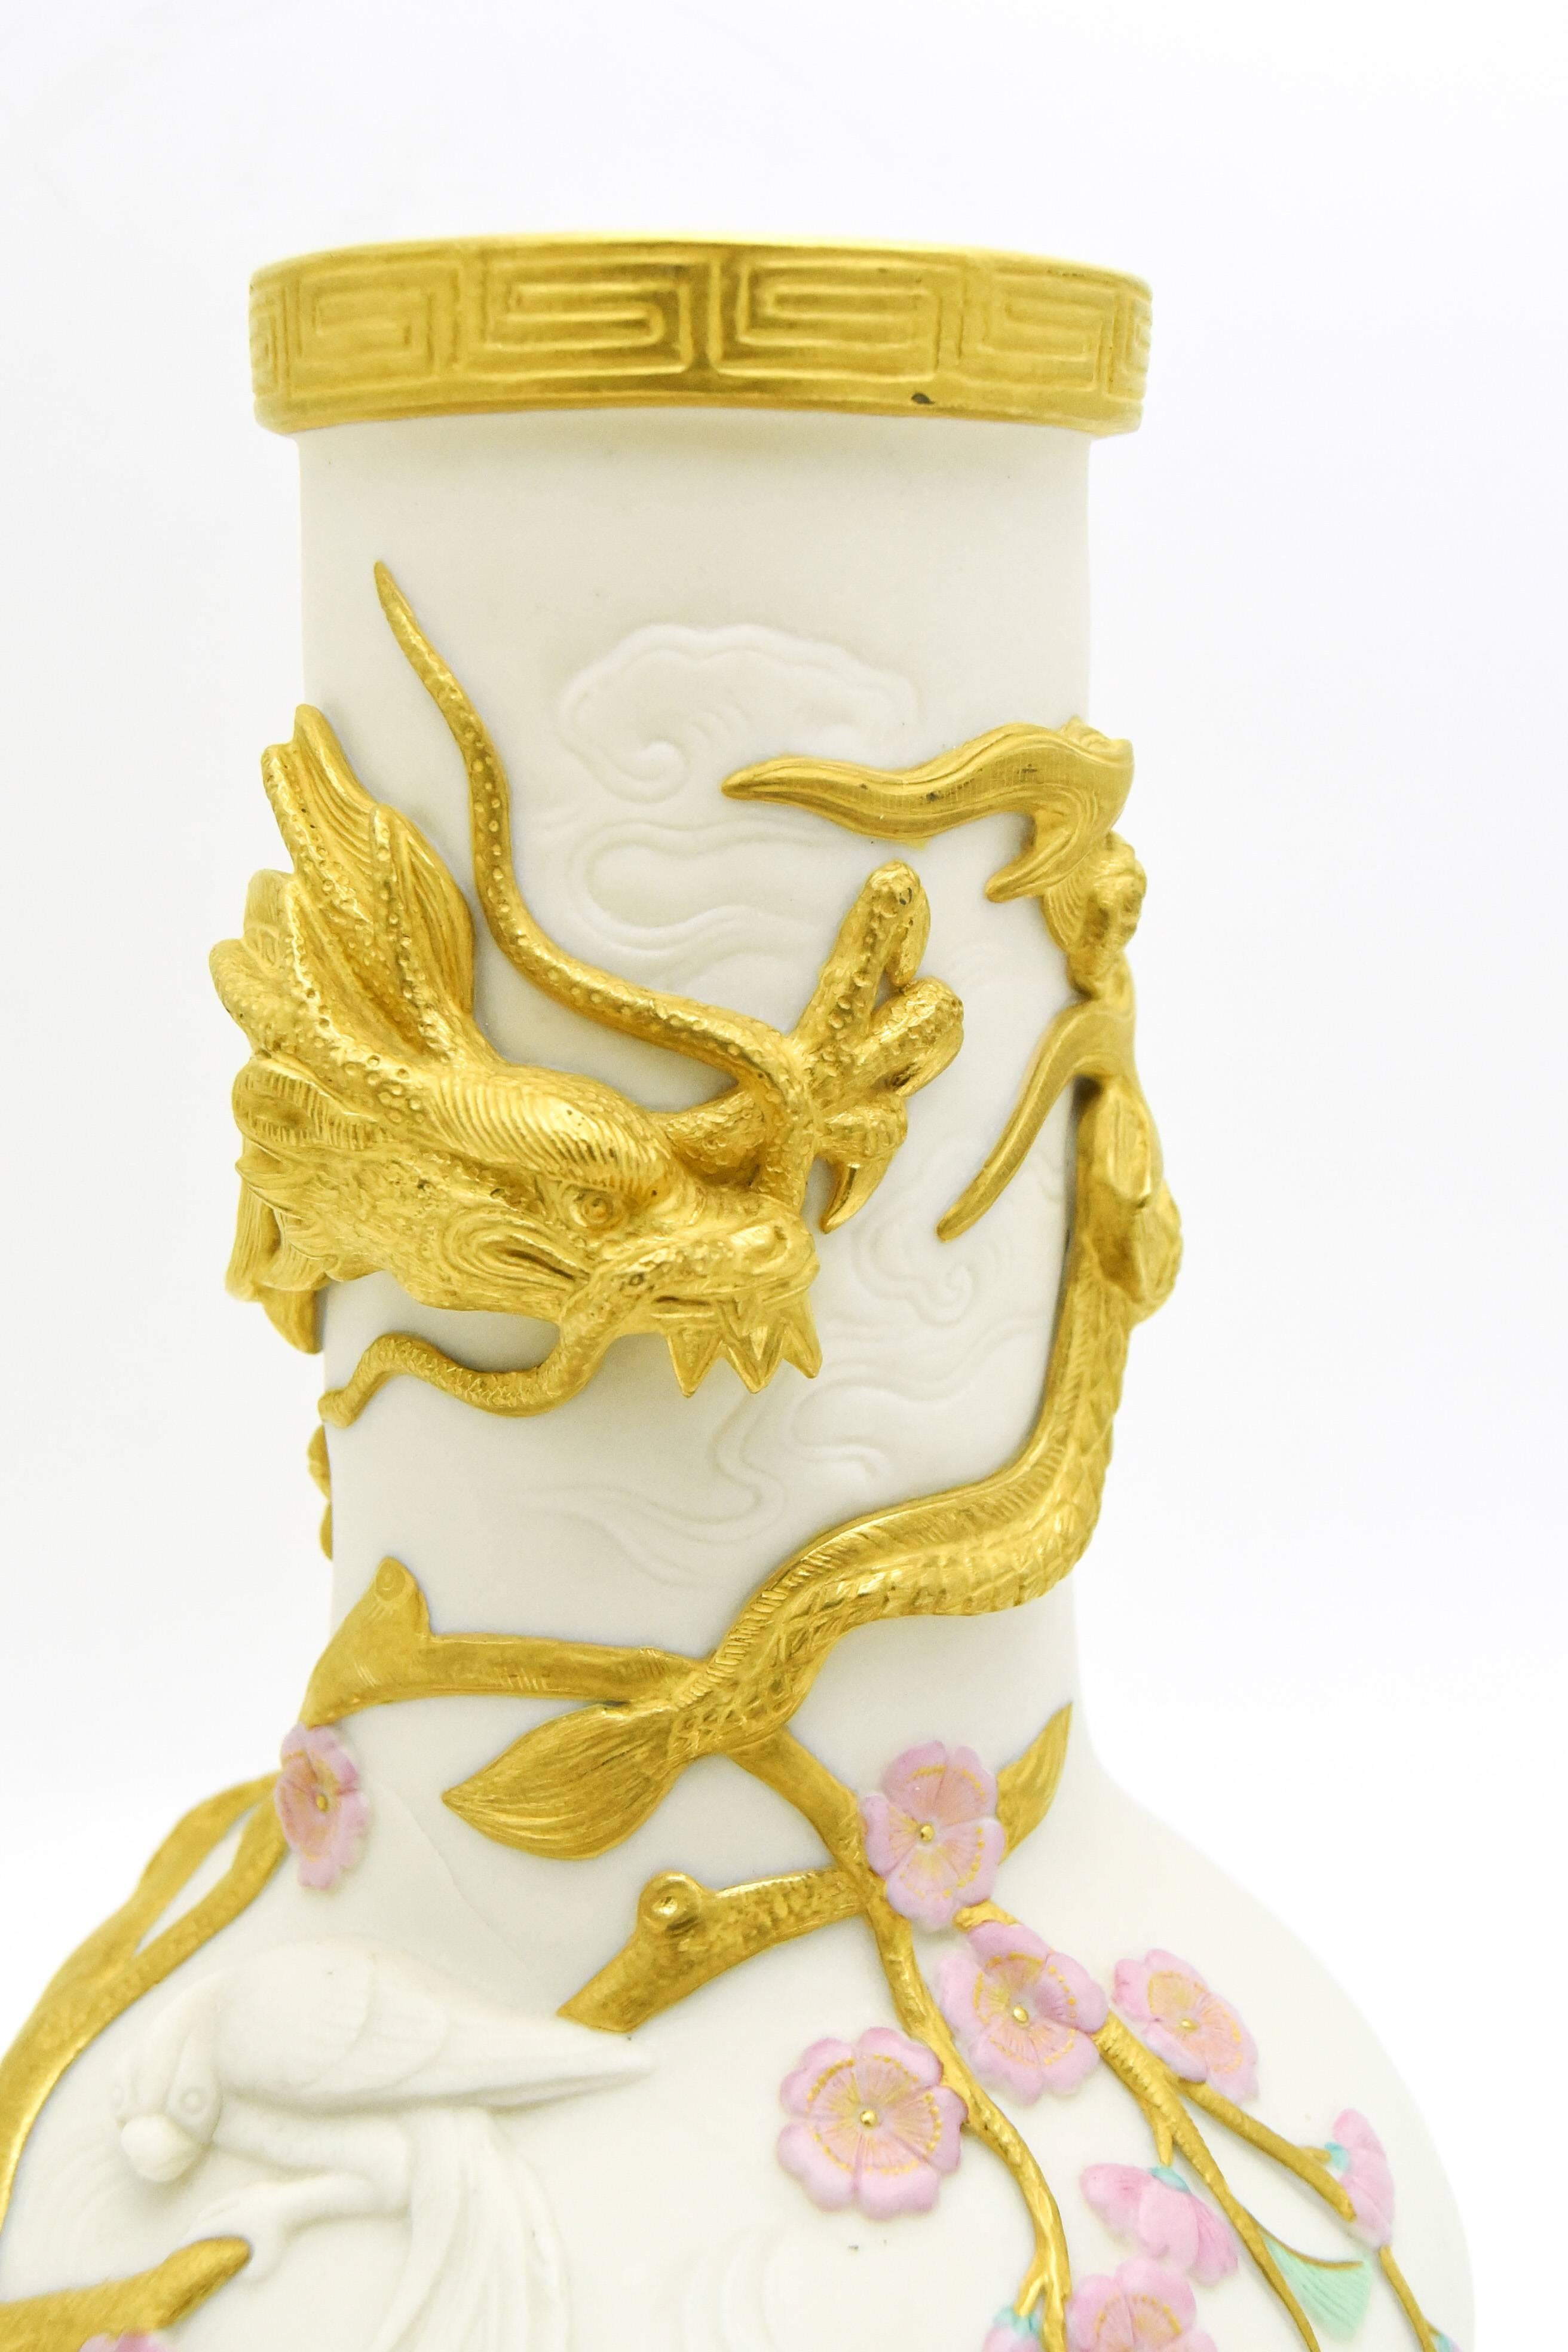 Porcelain Pair of Copeland Japonesque Vases with Gold Dragons, Birds & Cherry Blossoms